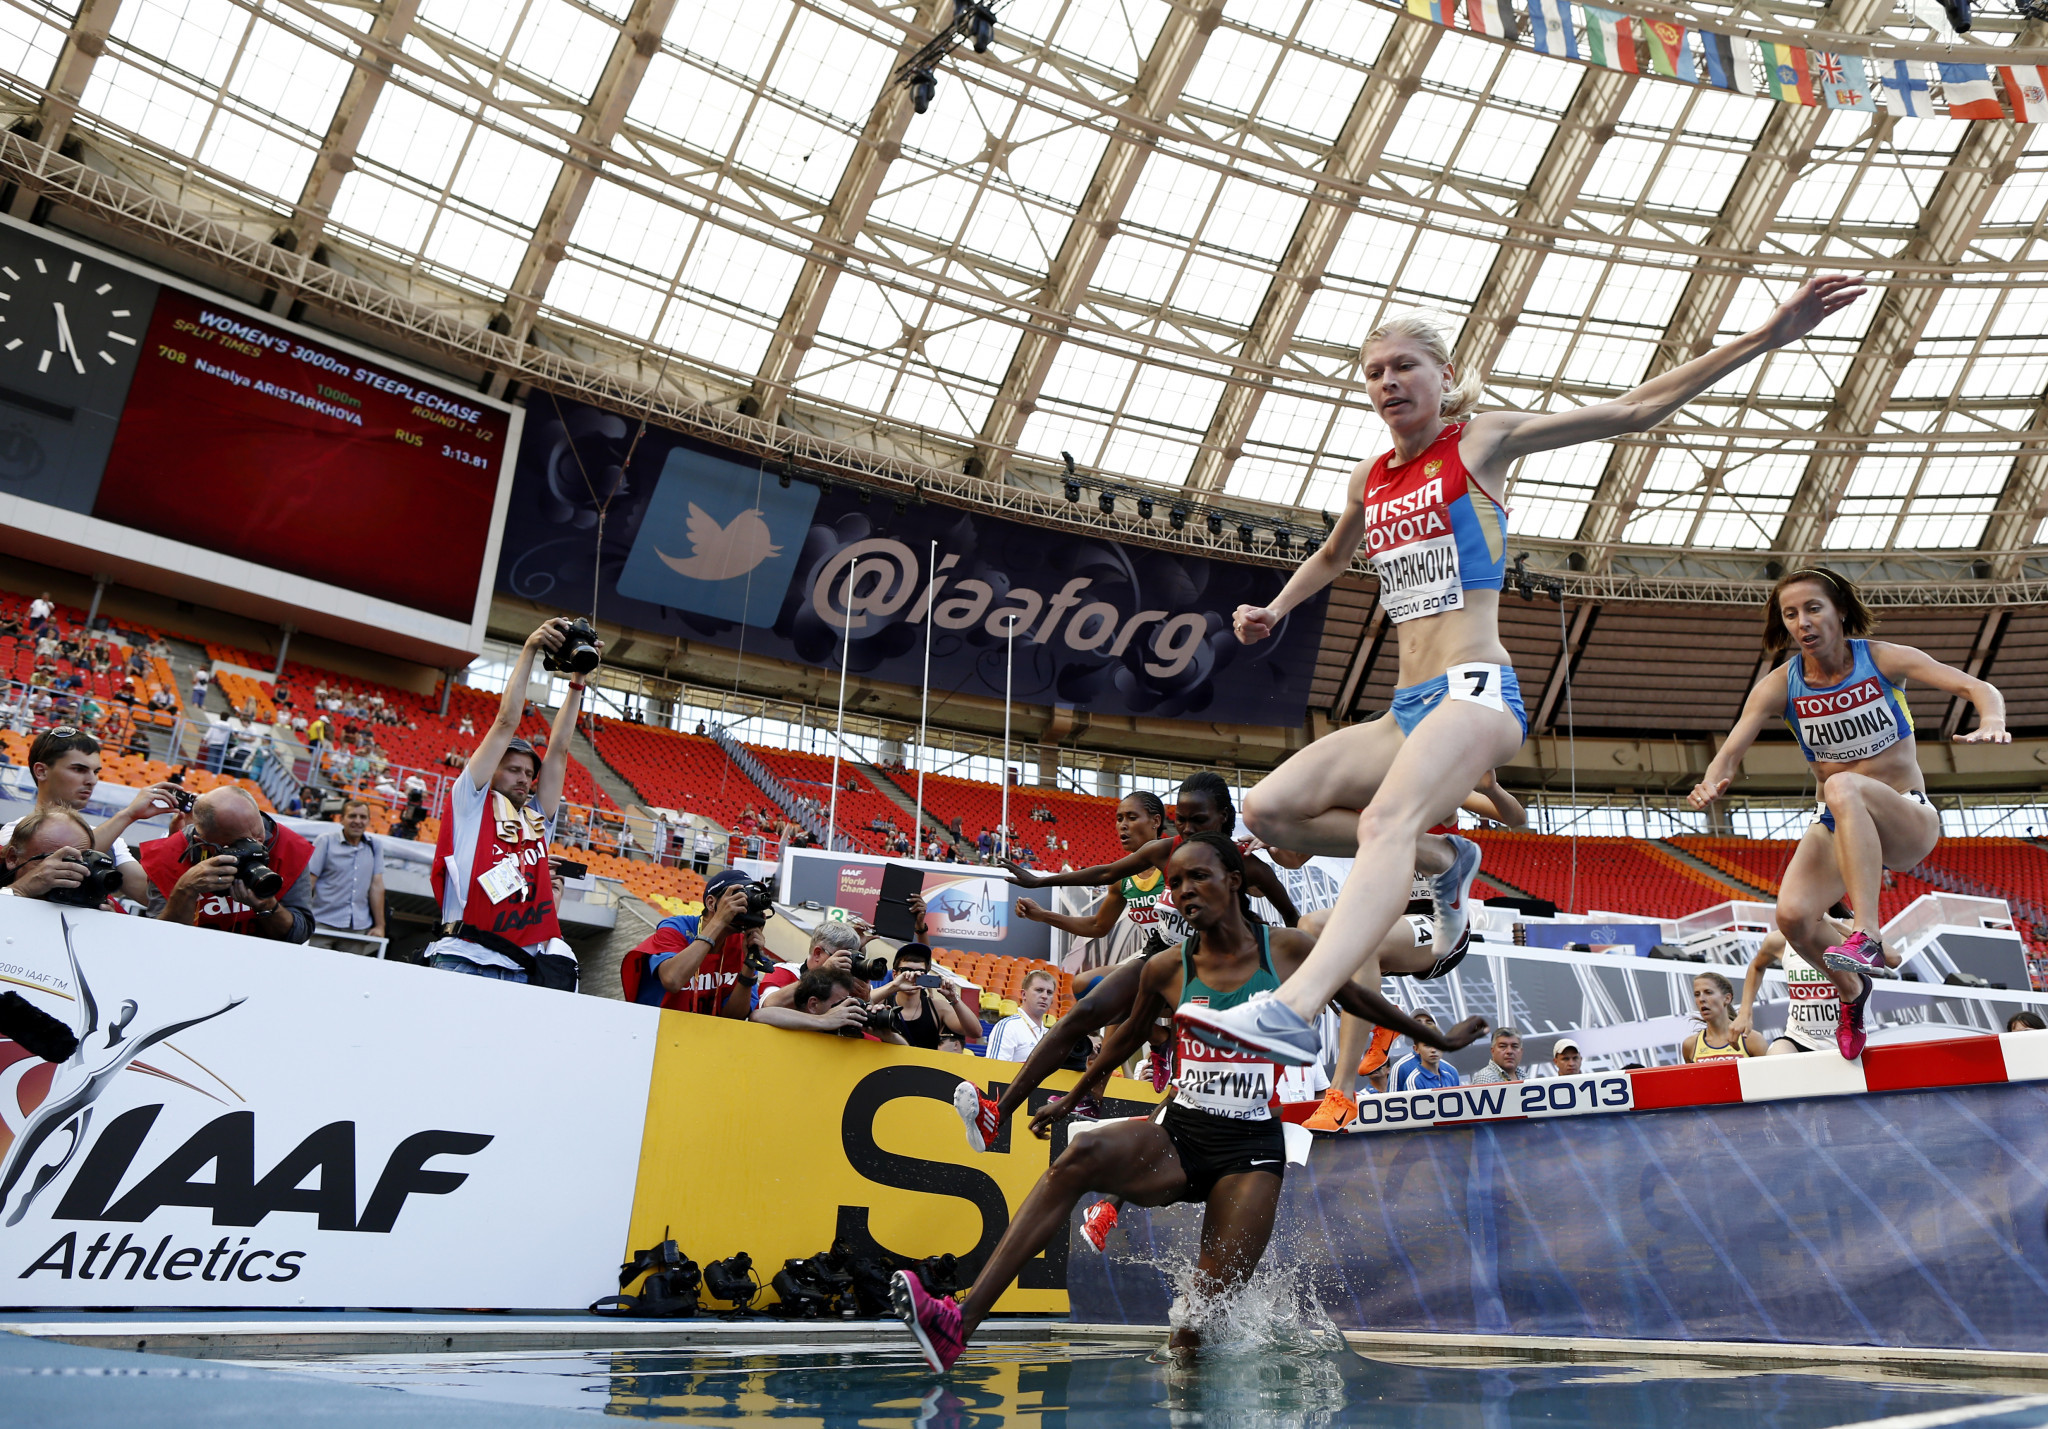 Middle-distance runner Natalya Aristarkhova, pictured here at the 2013 IAAF World Championships, is rumoured to be one of the 36 athletes who left the event in Irkutsk following the arrival of anti-doping officials ©Getty Images